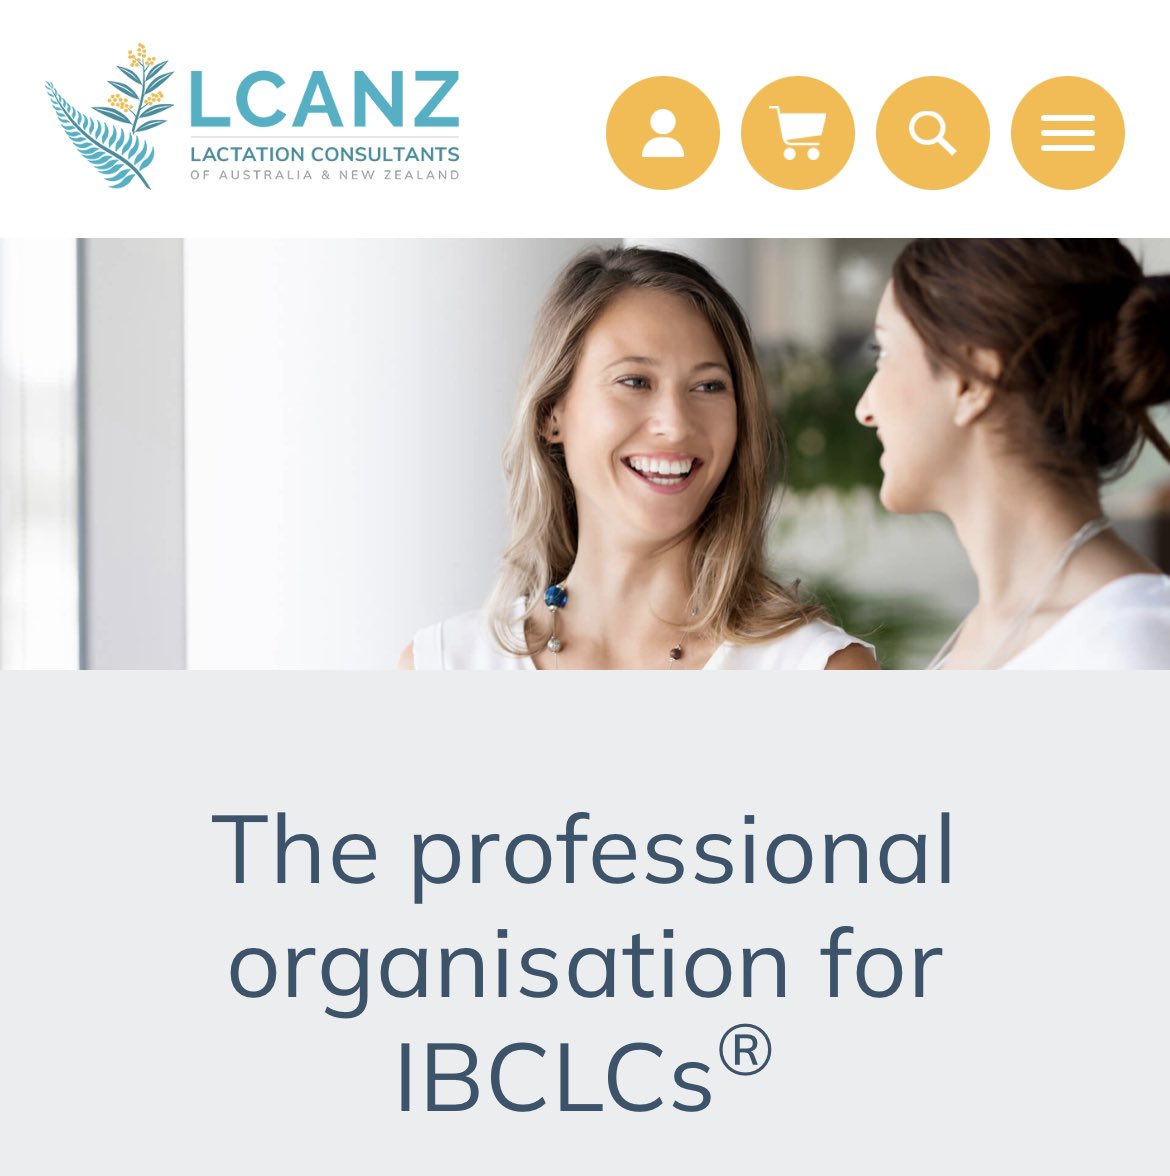 #IBCLCs specialise in supporting families even when barriers from birth interventions are a part of their journey. To learn more check out our professional education offerings. lcanz.org/shop-donate